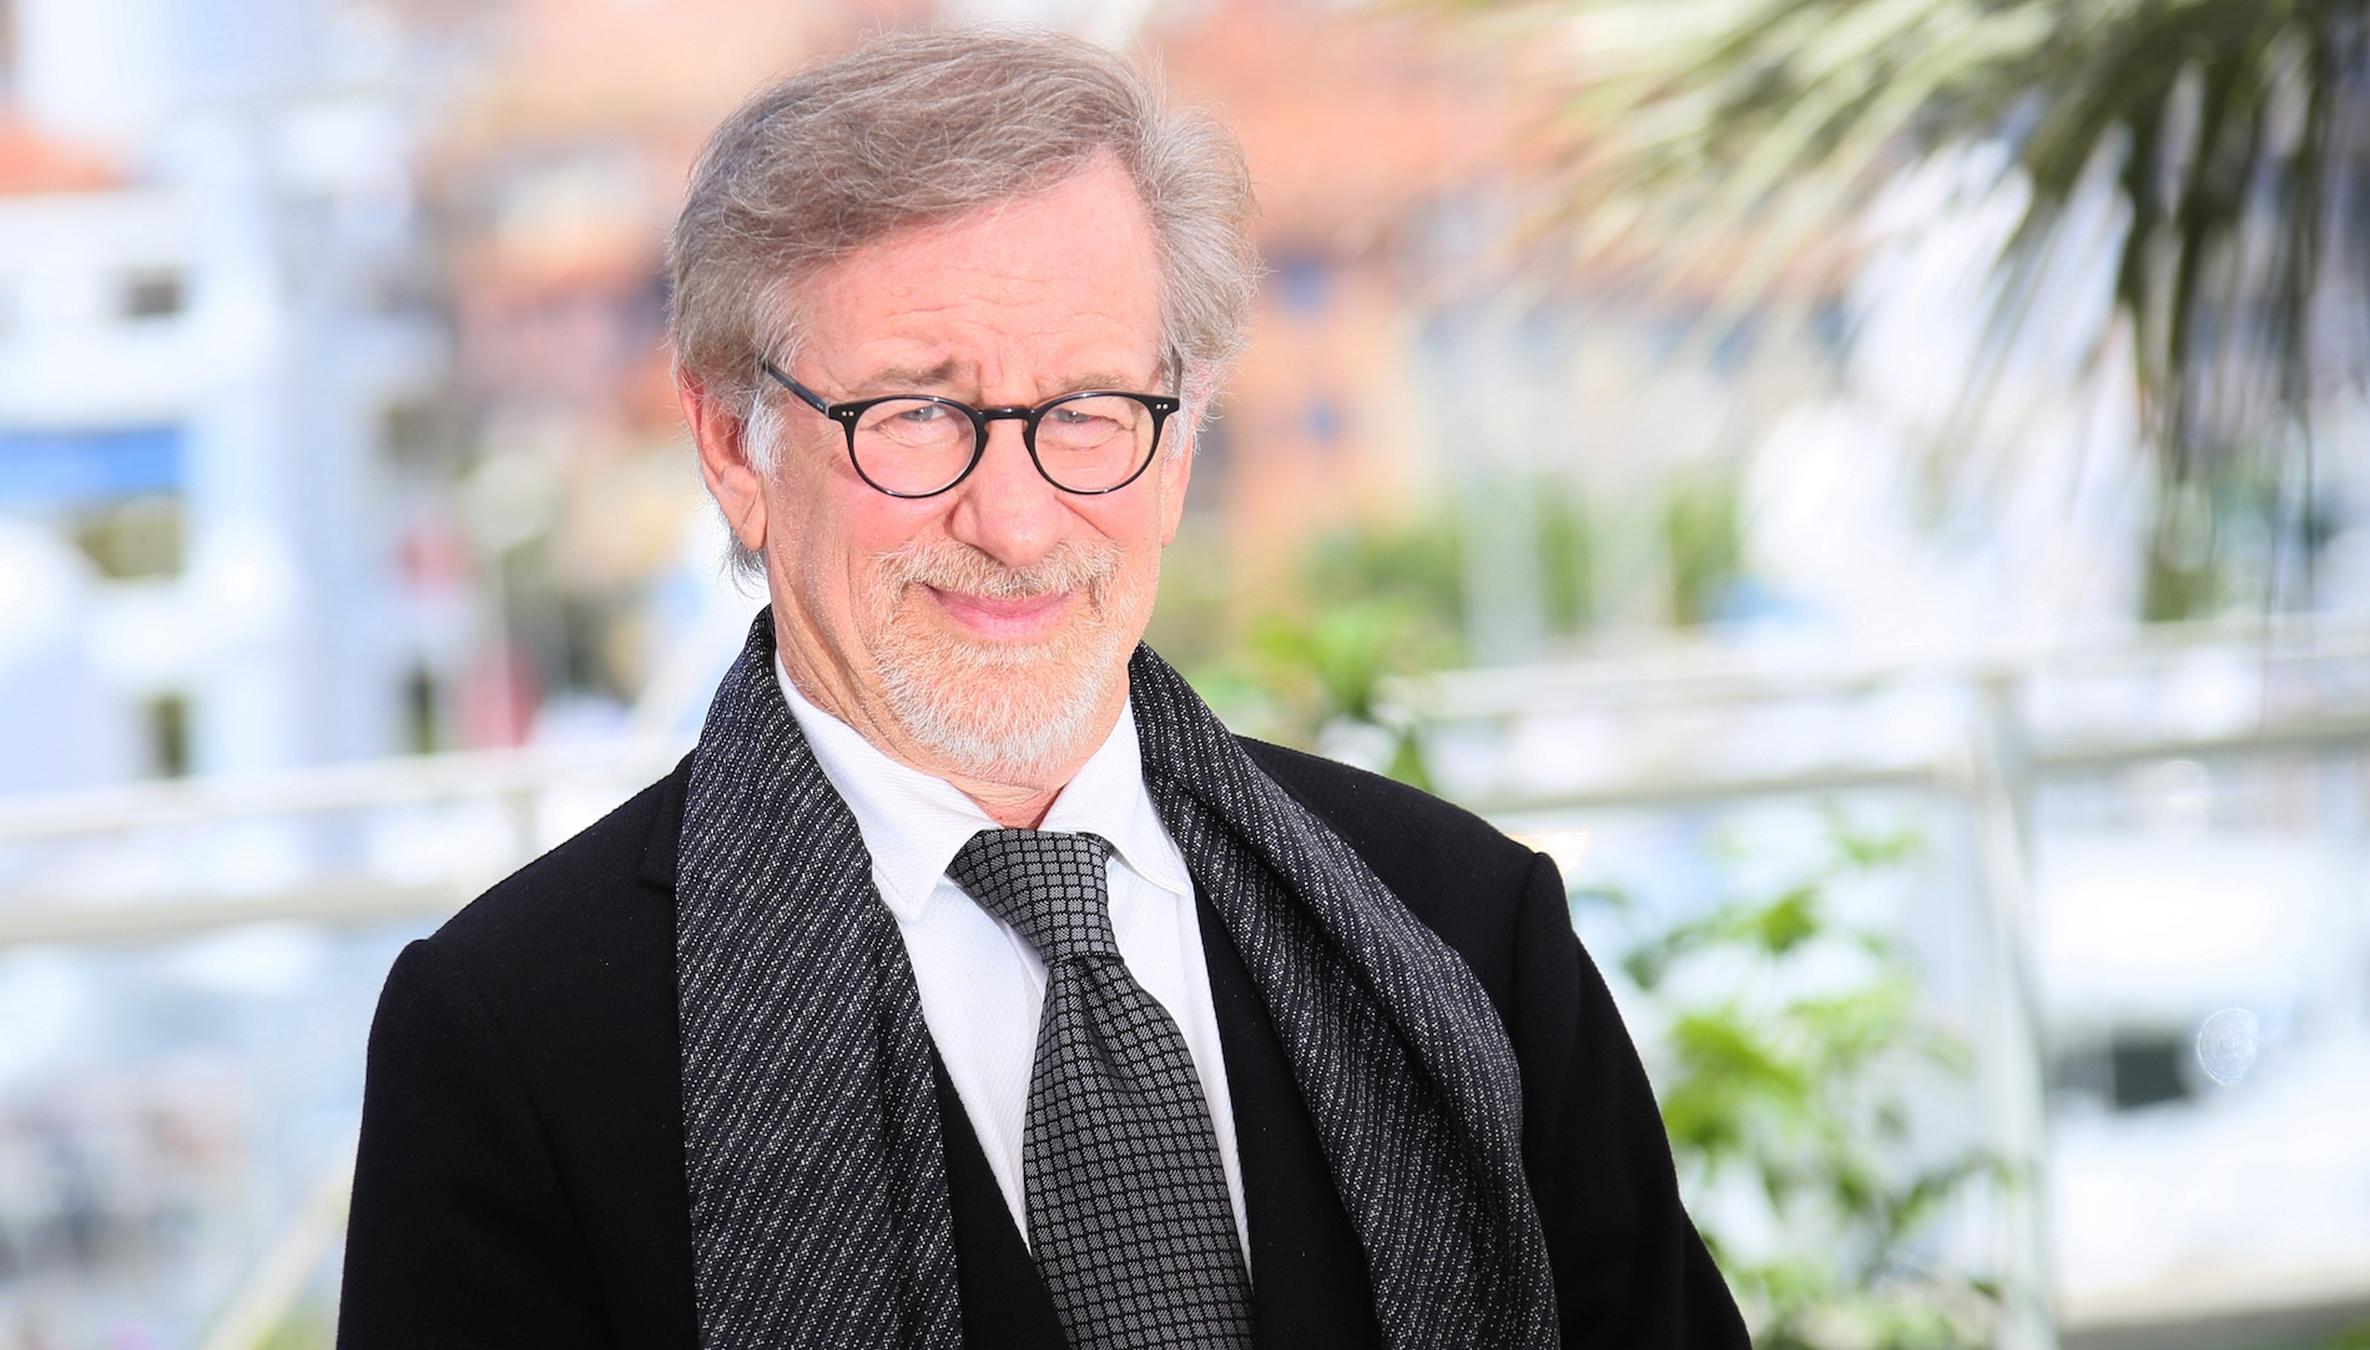 Steven Spielberg Is Developing A New Movie + More to Watch